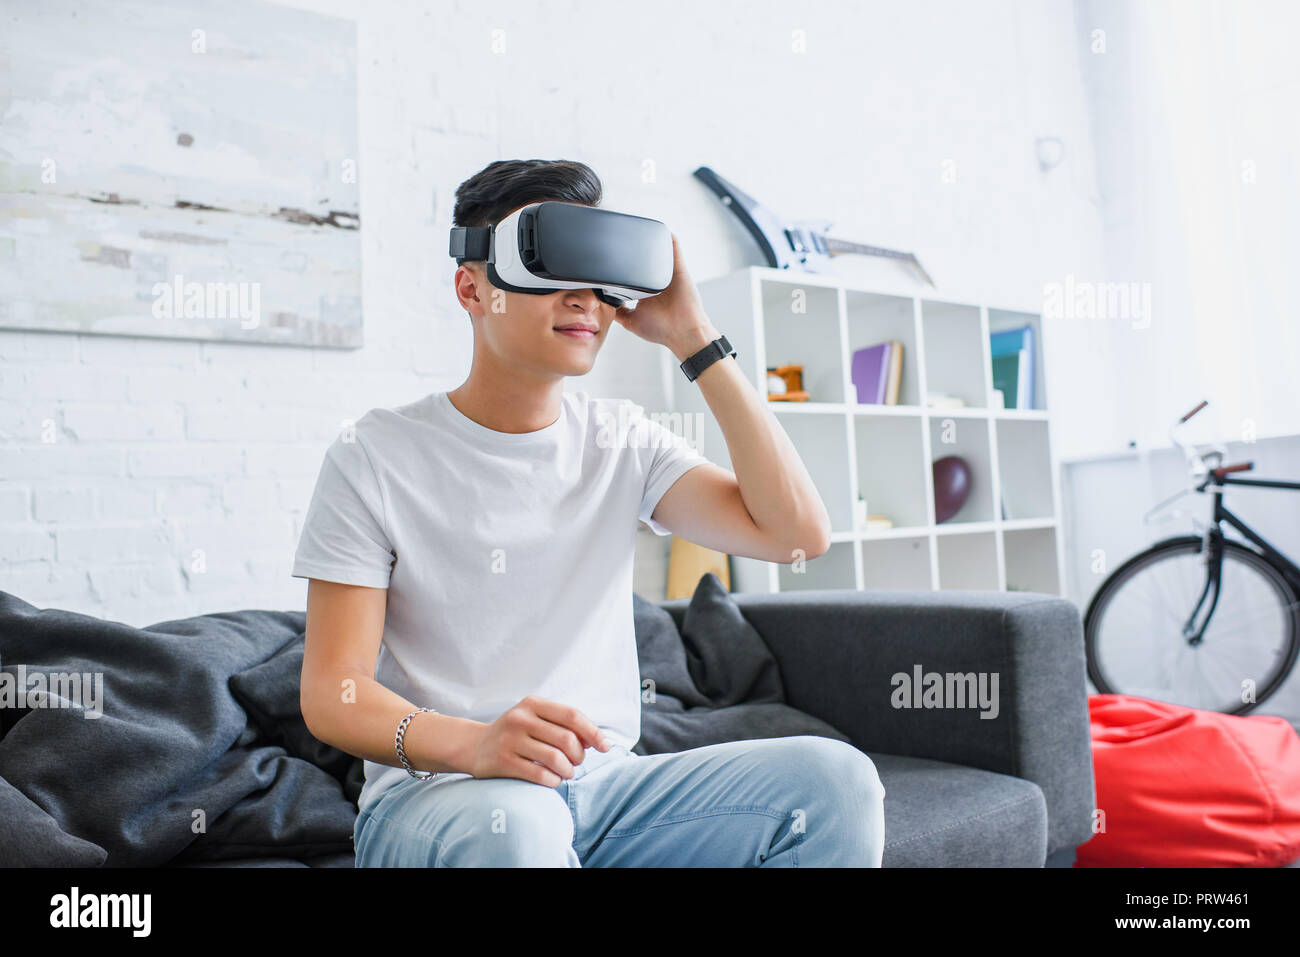 smiling young asian man using virtual reality headset while sitting on couch at home Stock Photo